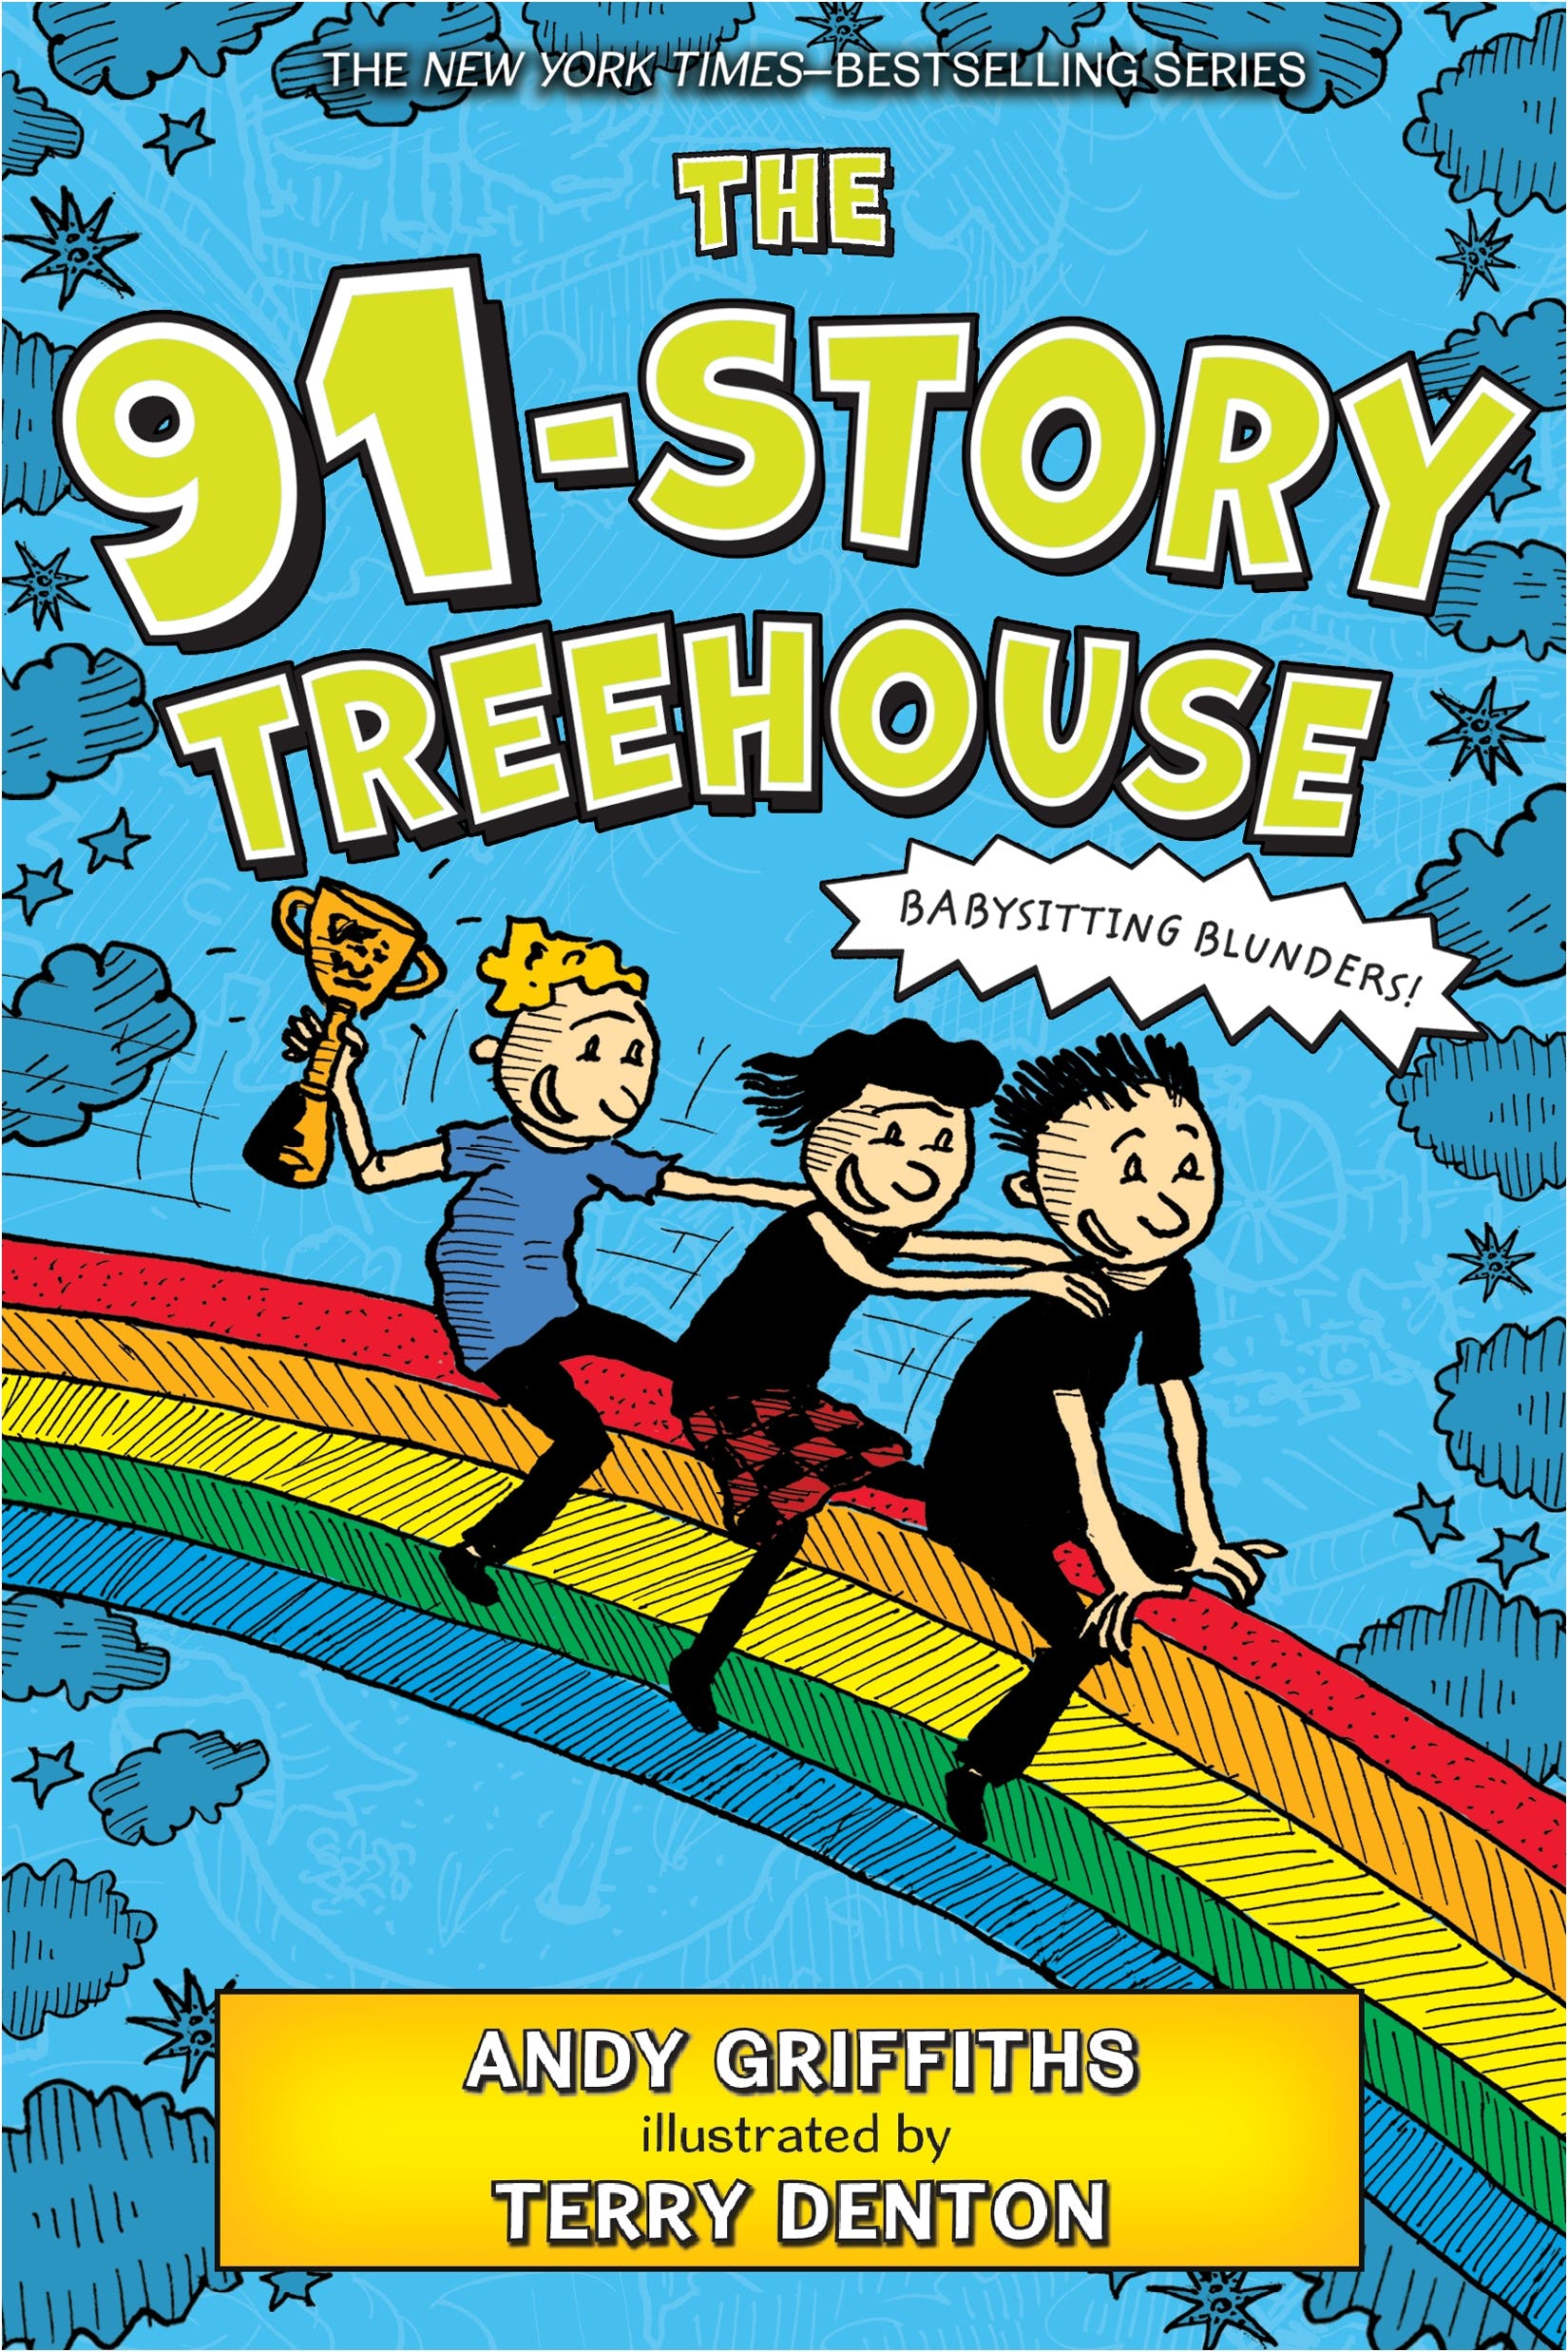 The 91-story treehouse : babysitting blunders!